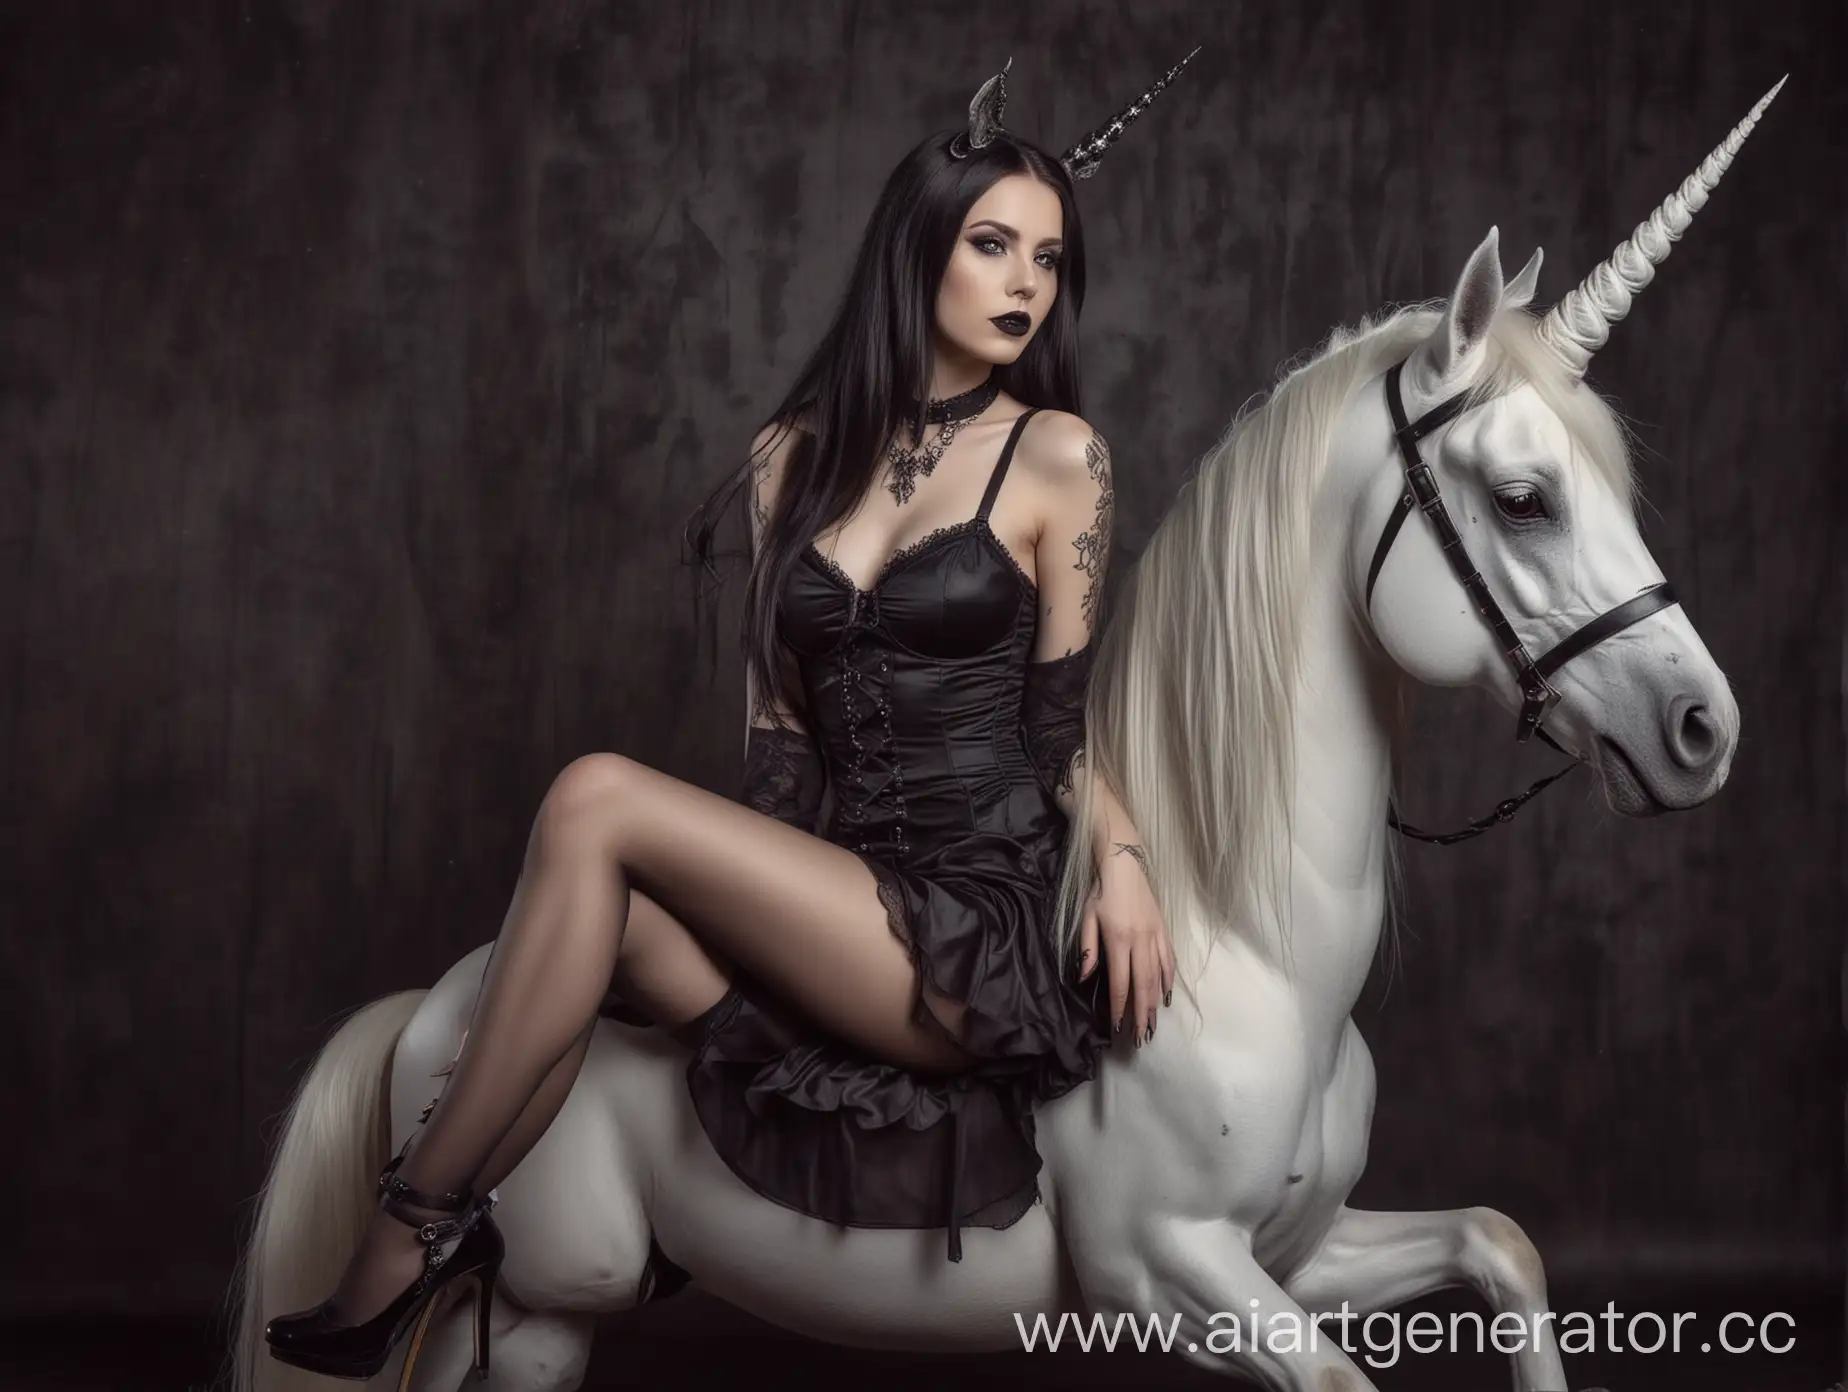 Sultry-Gothic-Fashion-Model-Poses-on-Unicorn-Fantasy-Gothic-Style-with-Silky-Lingerie-and-High-Heels